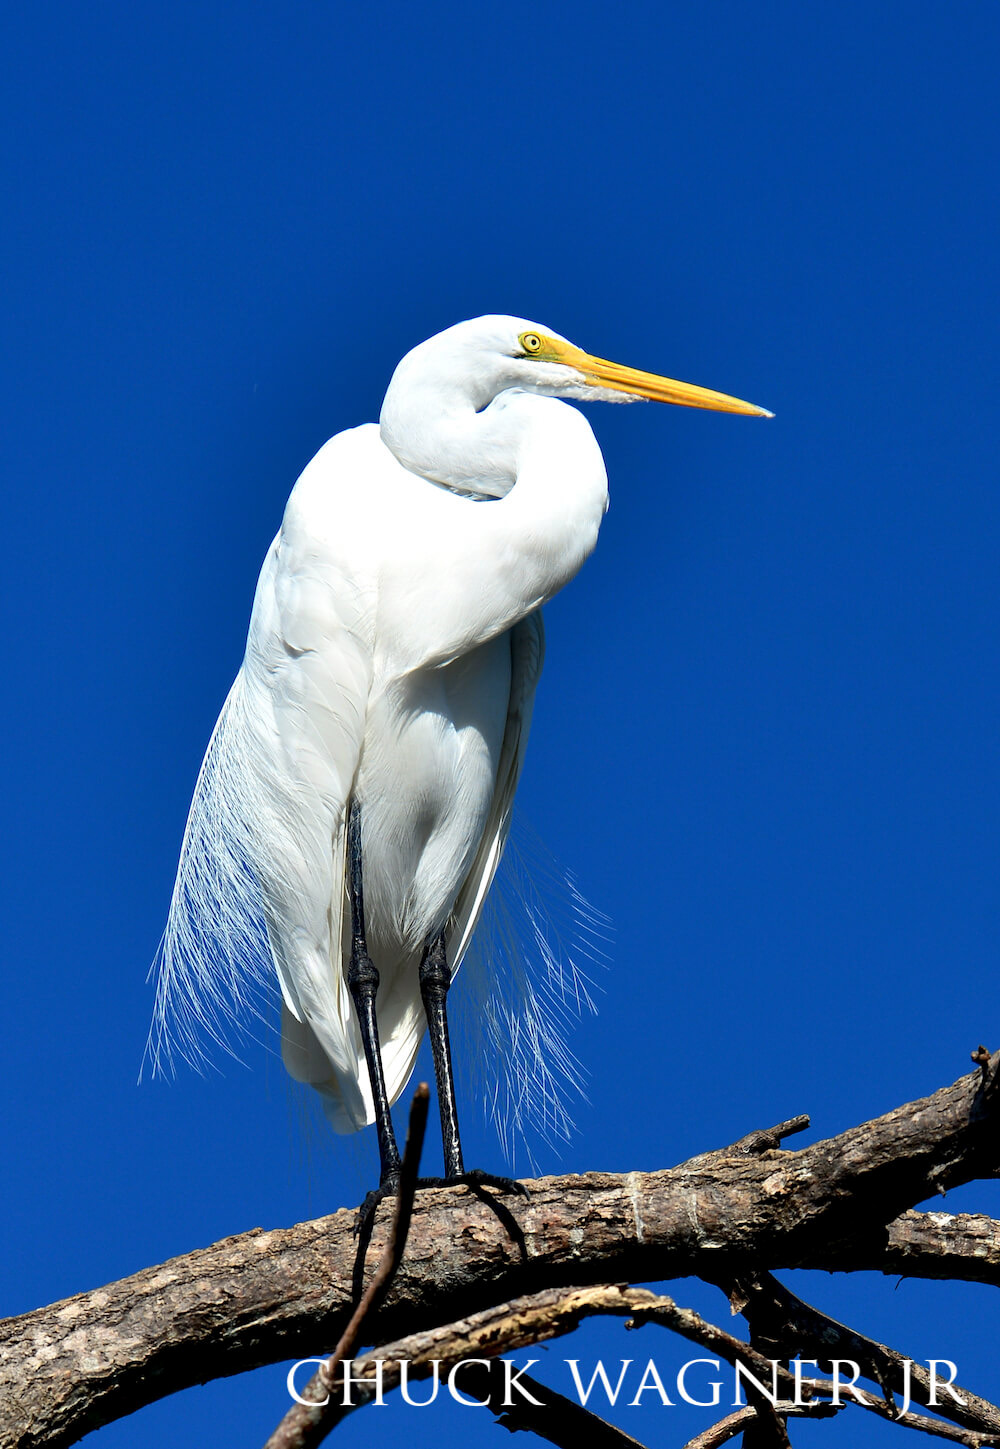 White egret perched on branch against a clear blue sky.